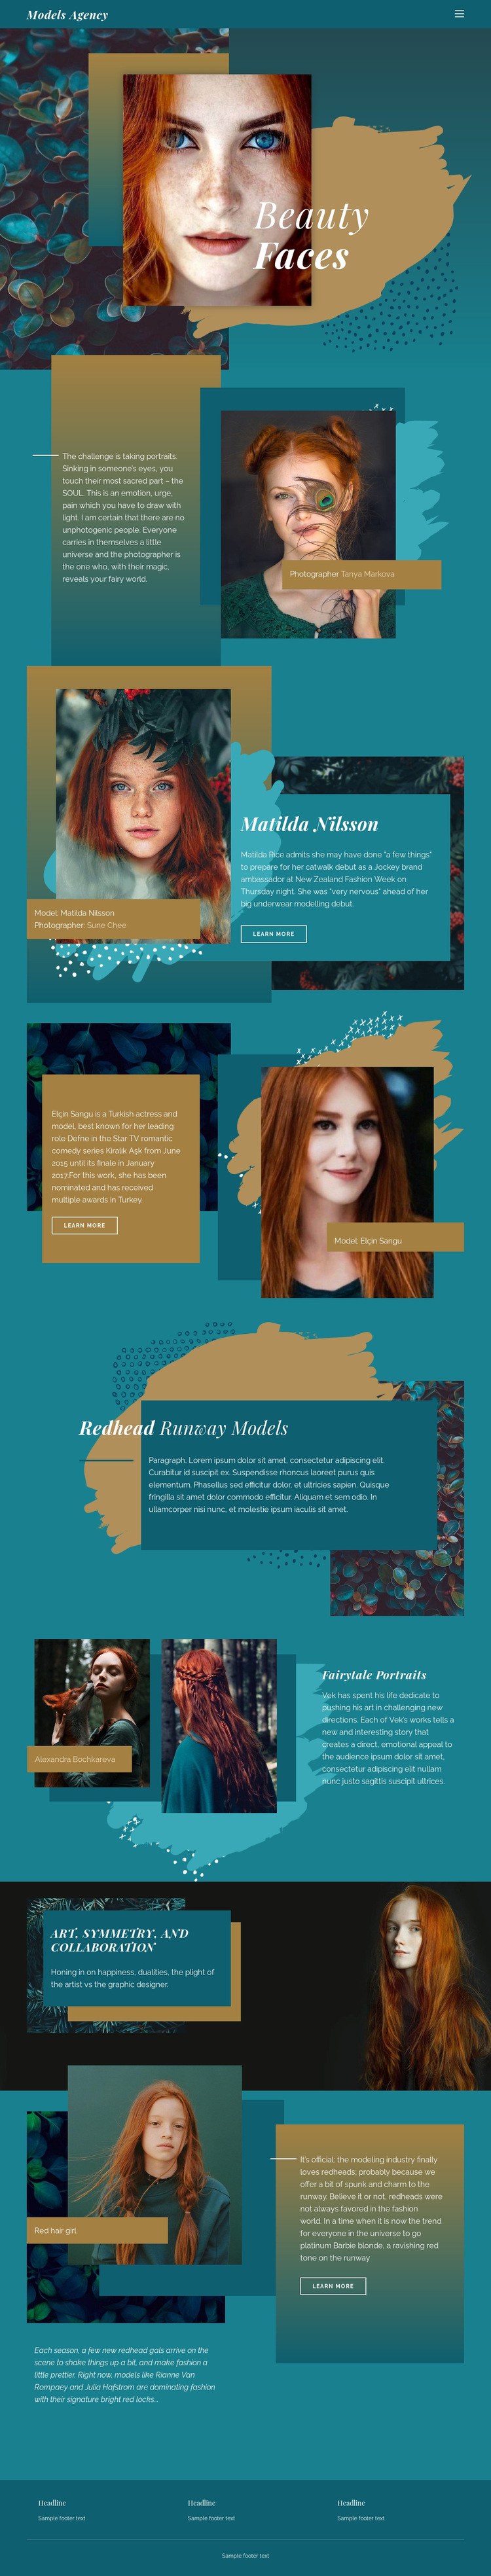 Faces of modern fashion Web Page Design